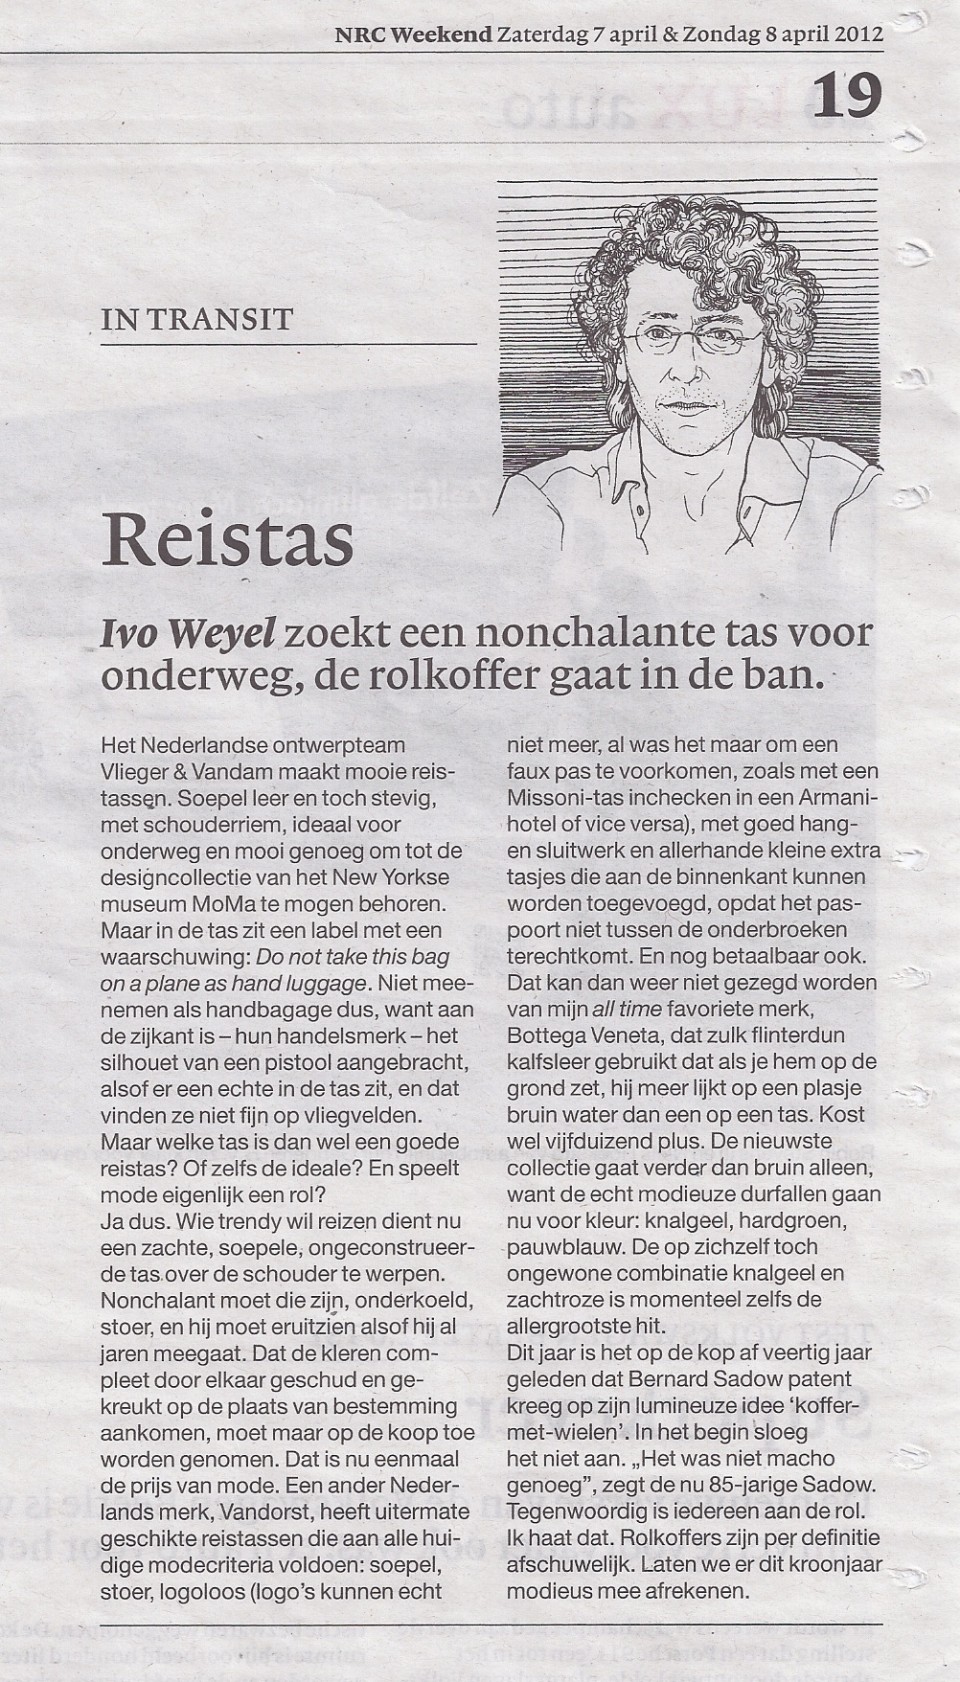 Article by Ivo Weyel in NRC April 7